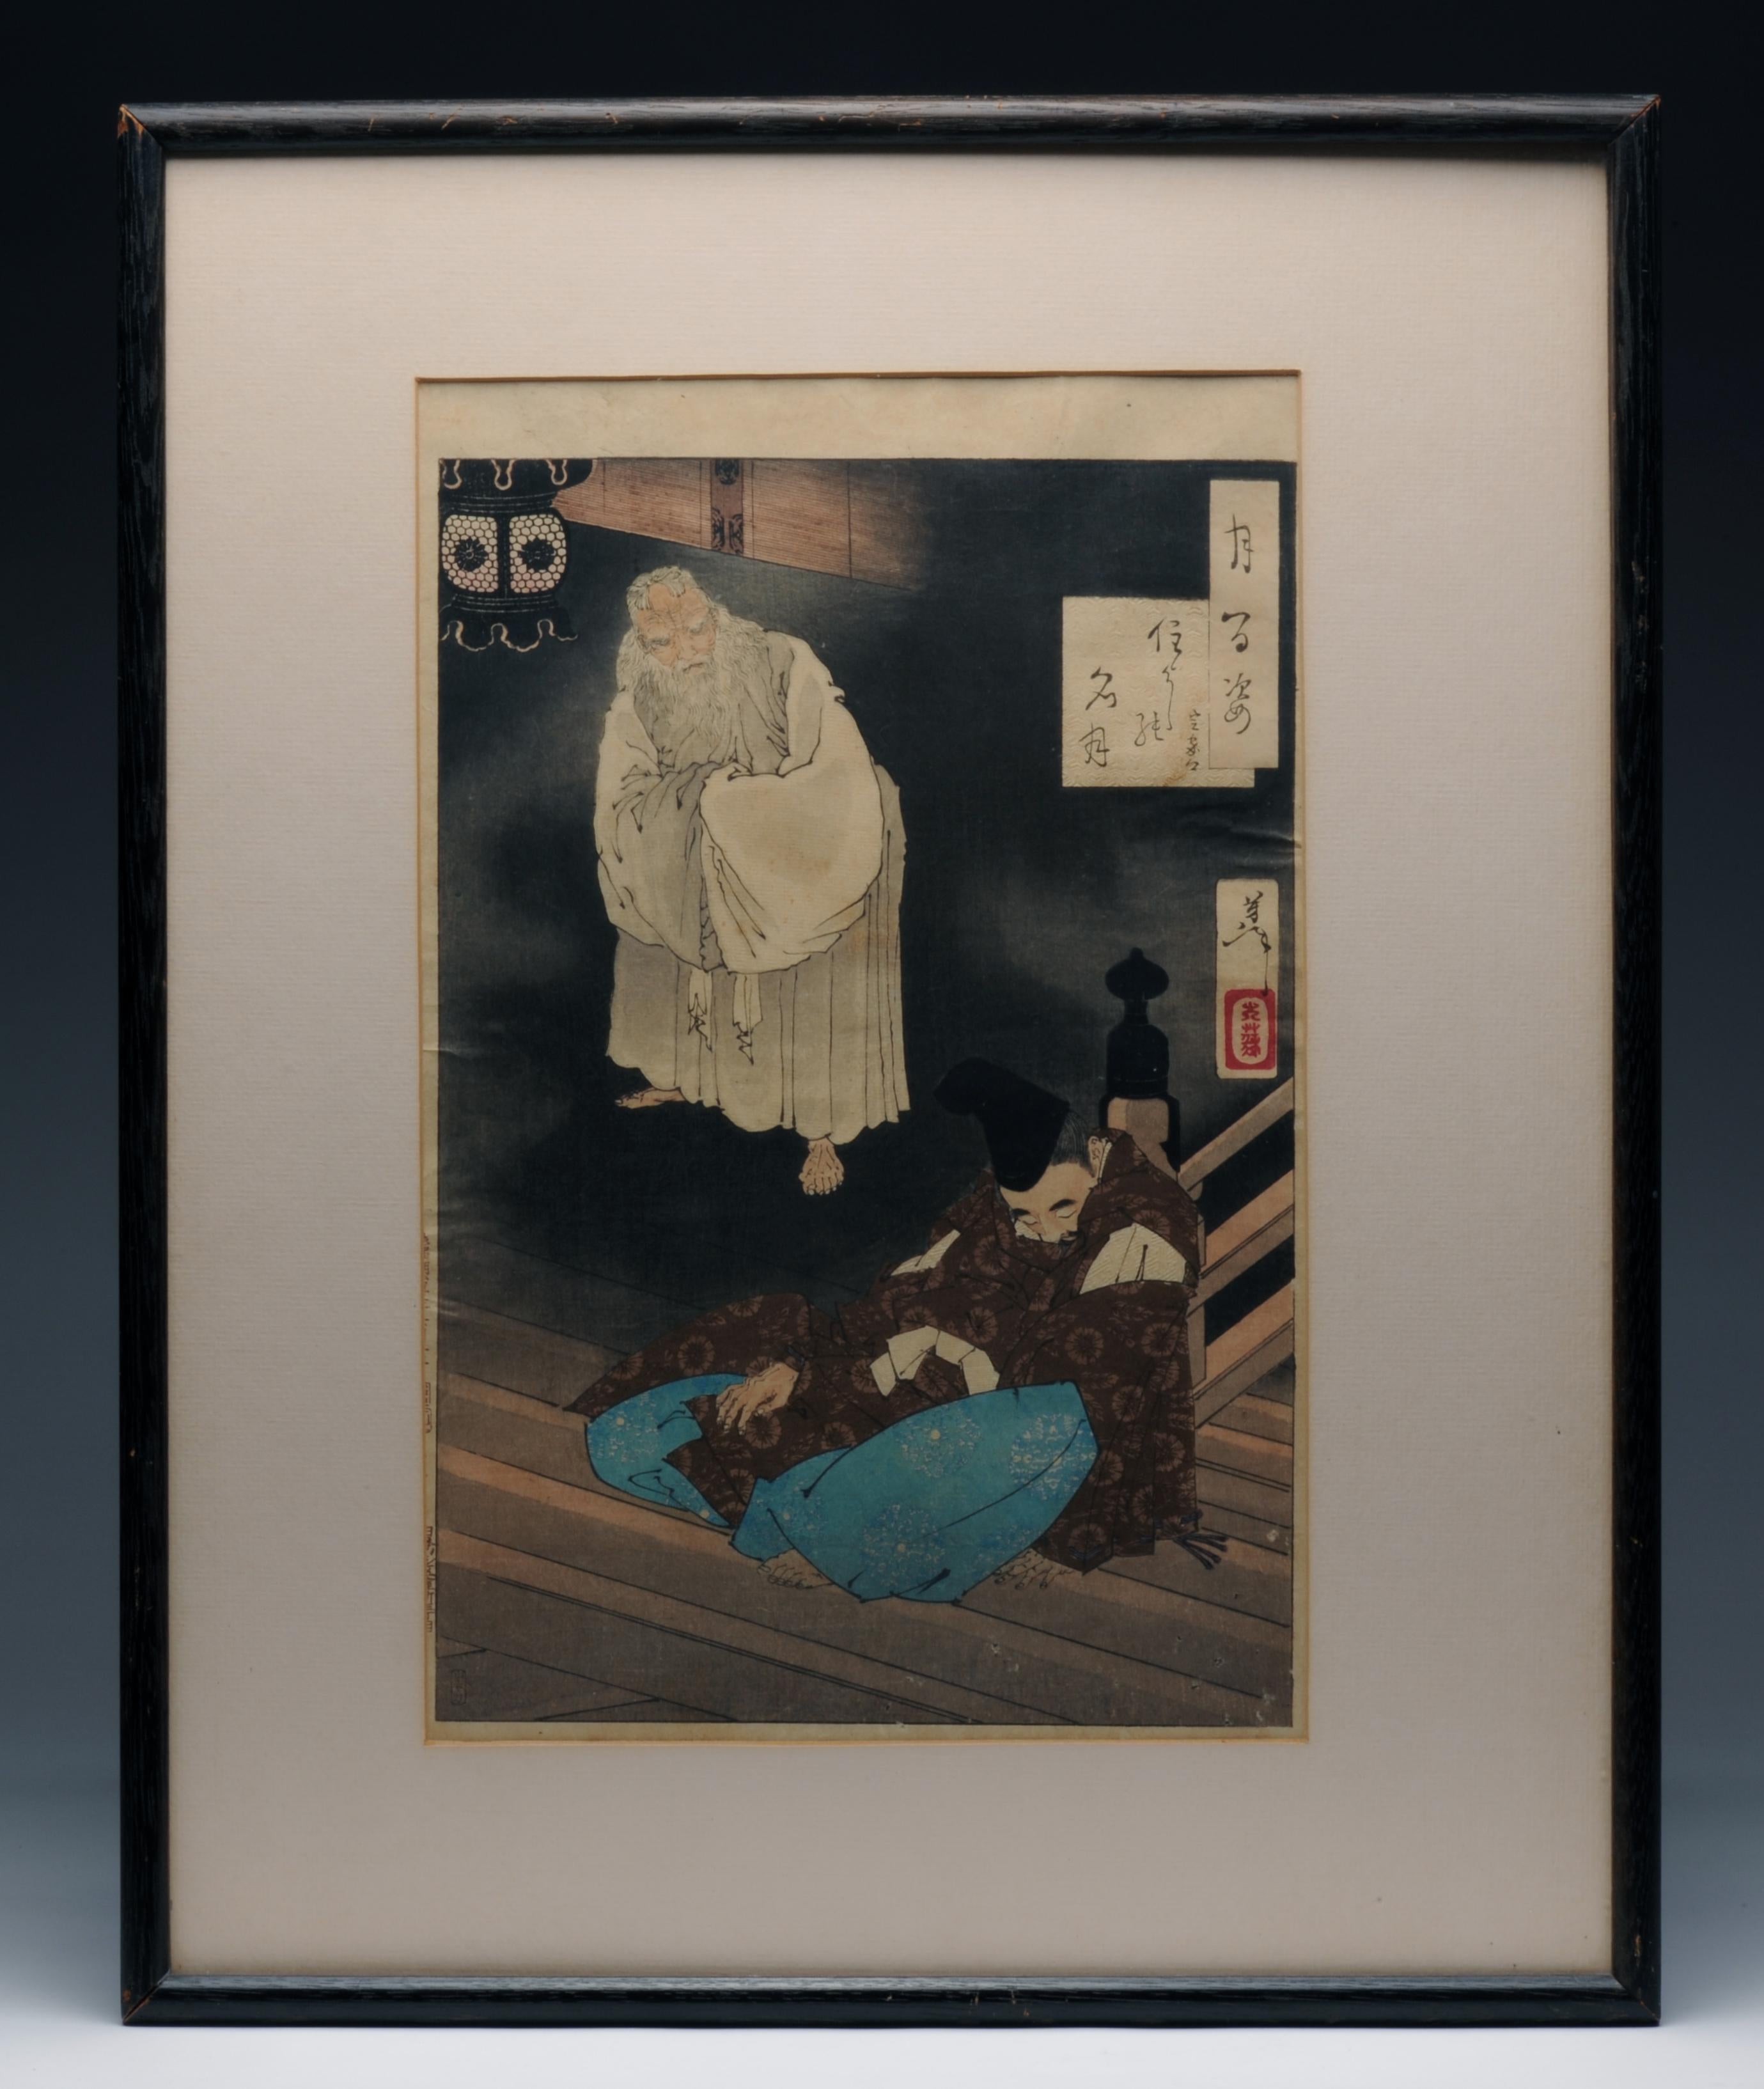 Framed block print from Yoshitoshi's One Hundred Aspects of the moon. Image depicts renowned poet Fujiwara no Sadaie, known as Teika, sleeping in the Shinto shrine at Sumiyoshi and the god of poetry appears in his dream.

This is an original print,